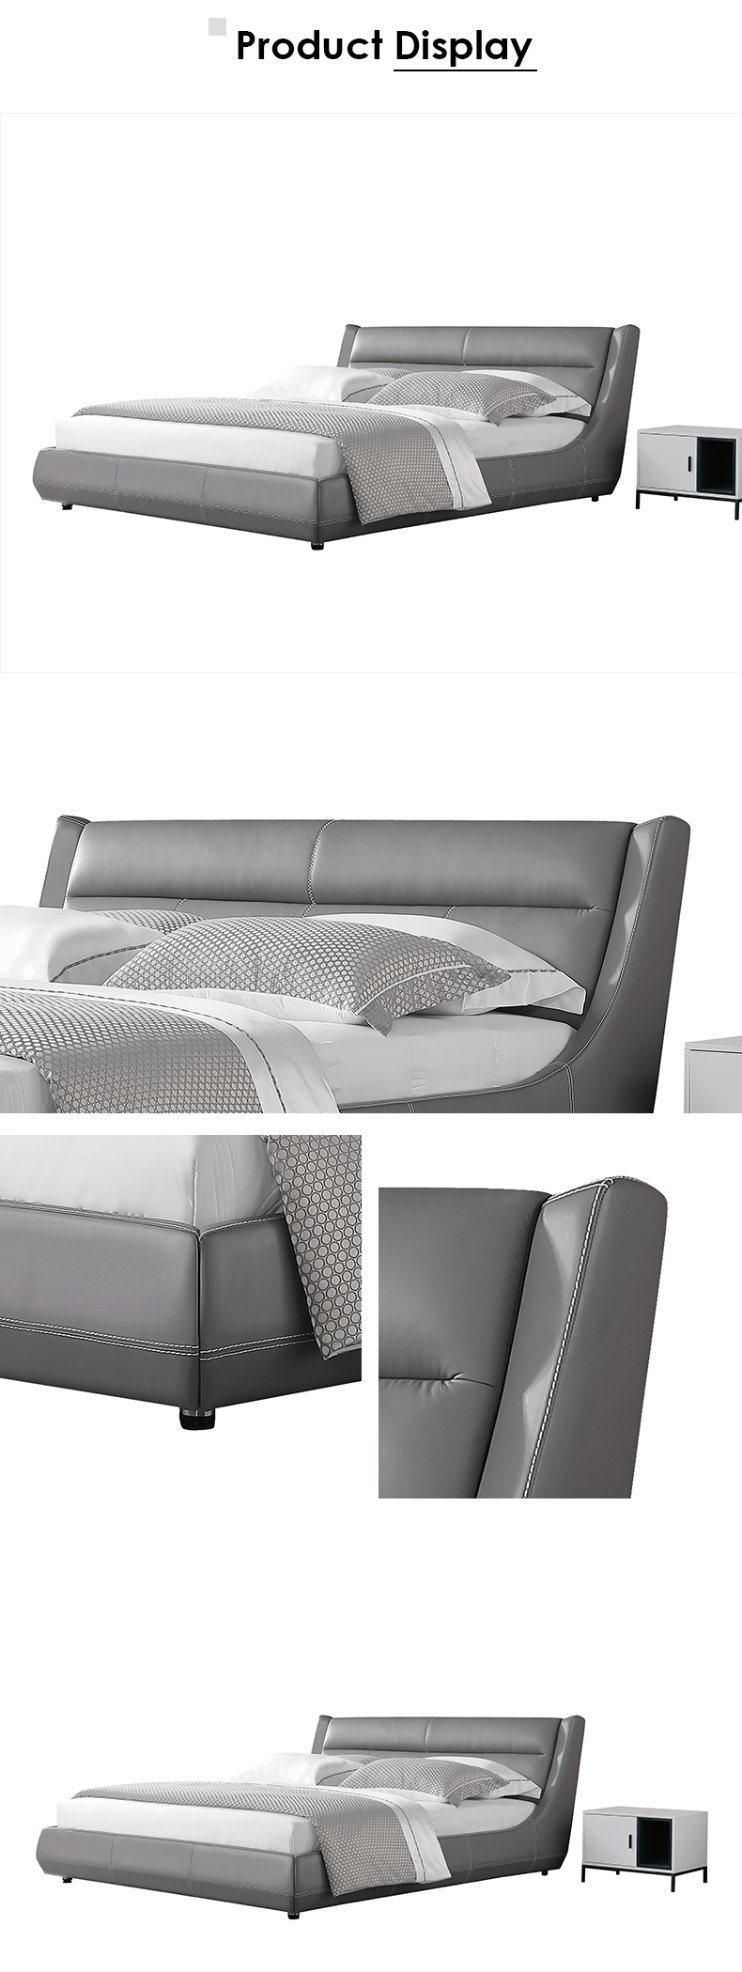 European Style Bedroom Furniture Modern Grey Leather King Bed